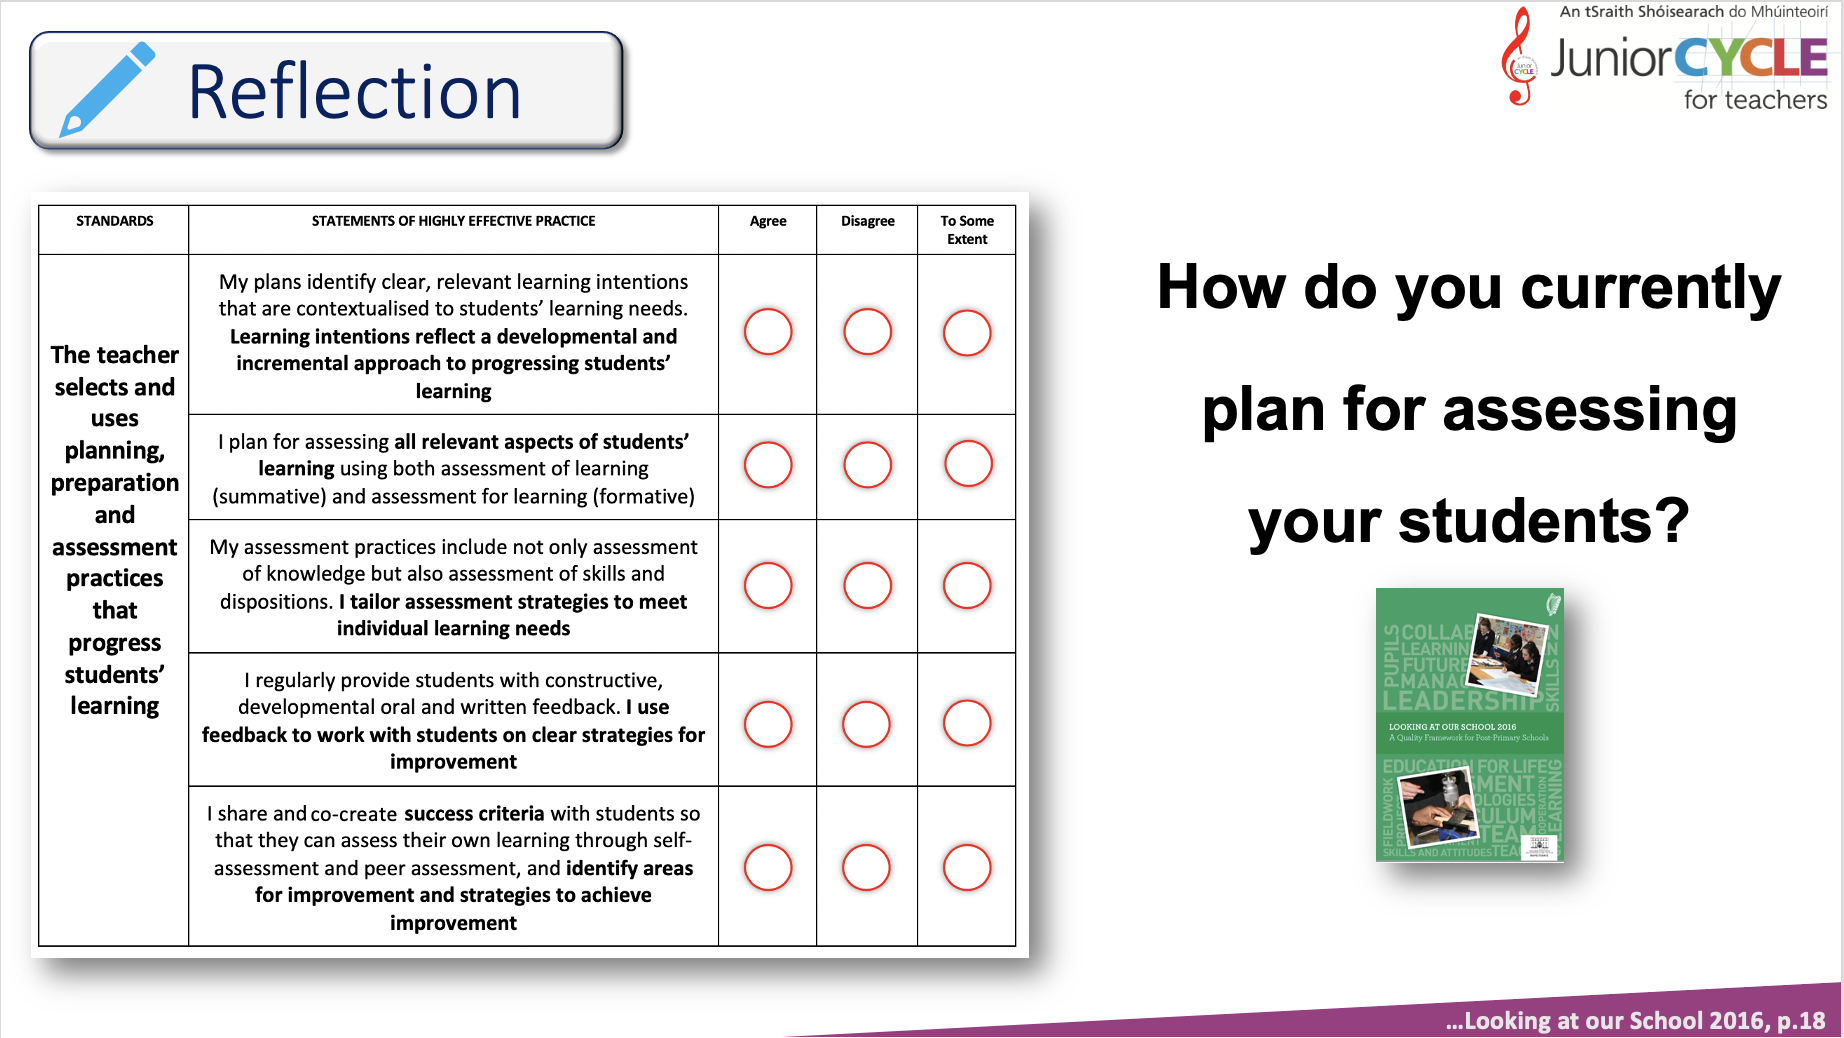 How do you currently plan for assessing your students?